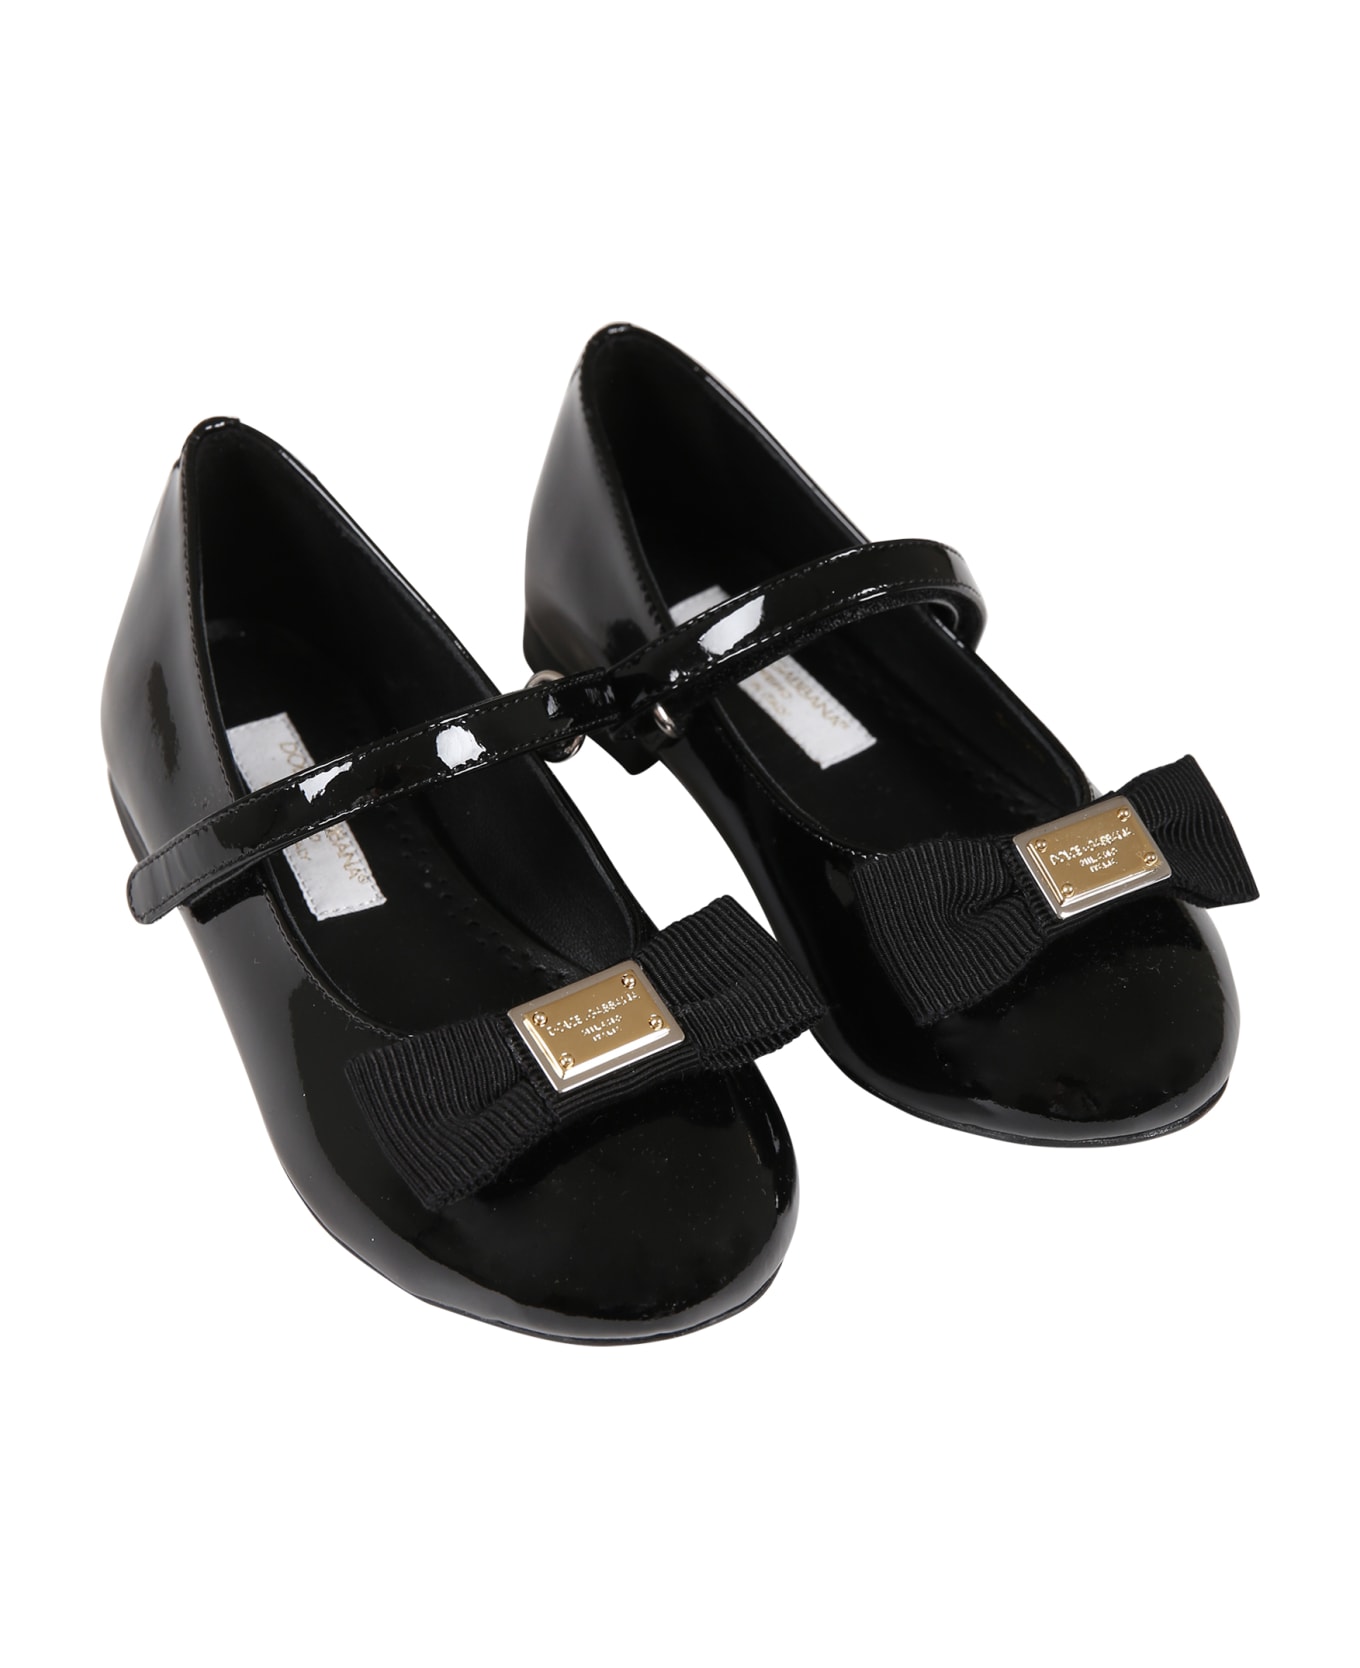 Dolce & Gabbana Black Ballet Flats For Girl With Logo And Bow - Black シューズ